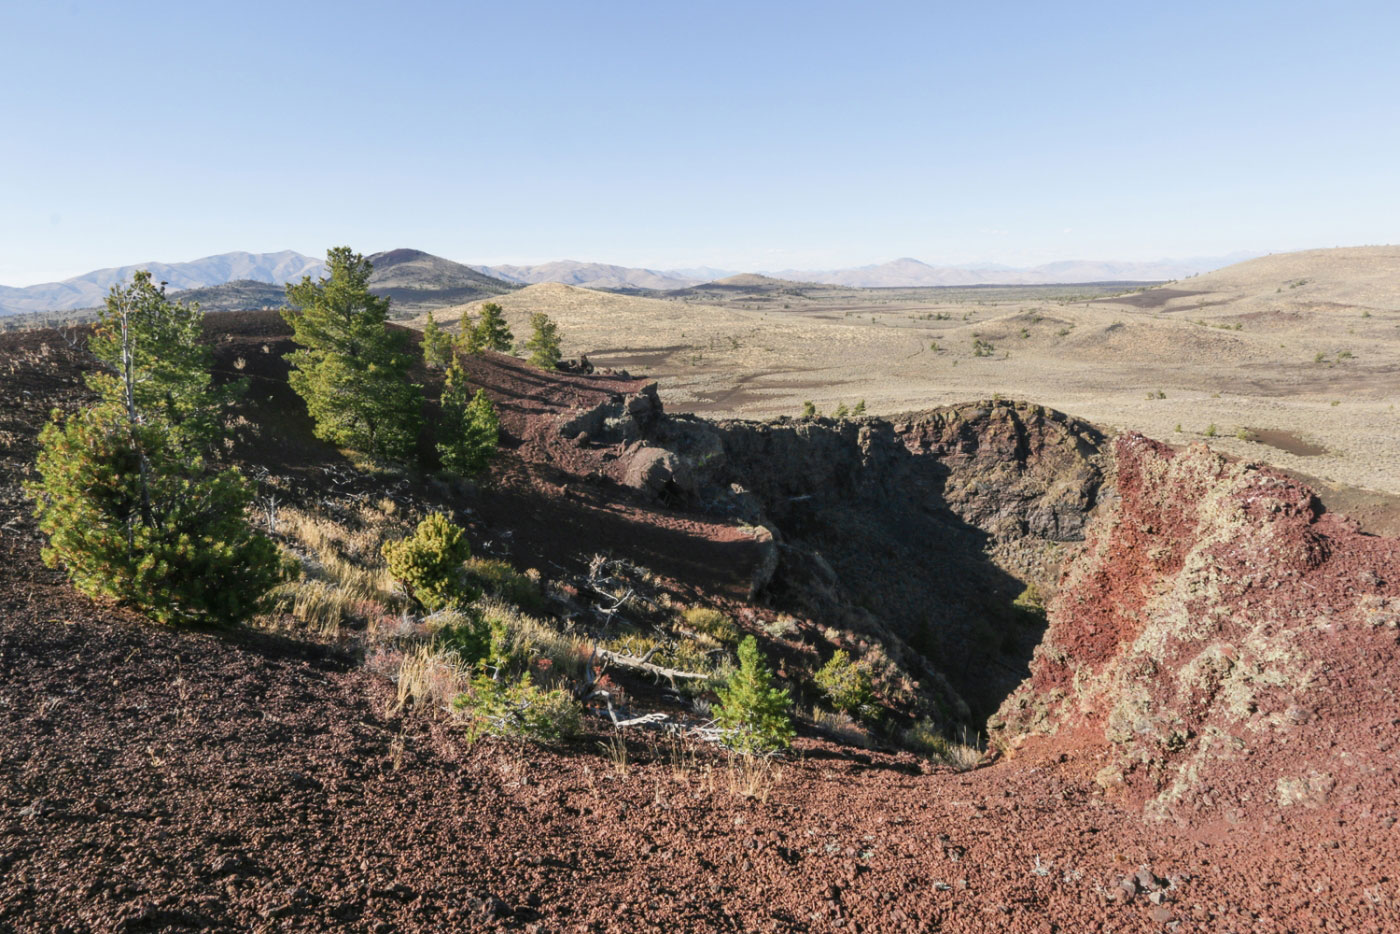 Hike Buffalo Cave and Echo Crater via Wilderness Trail in Craters of the Moon National Monument, Idaho - Stav is Lost